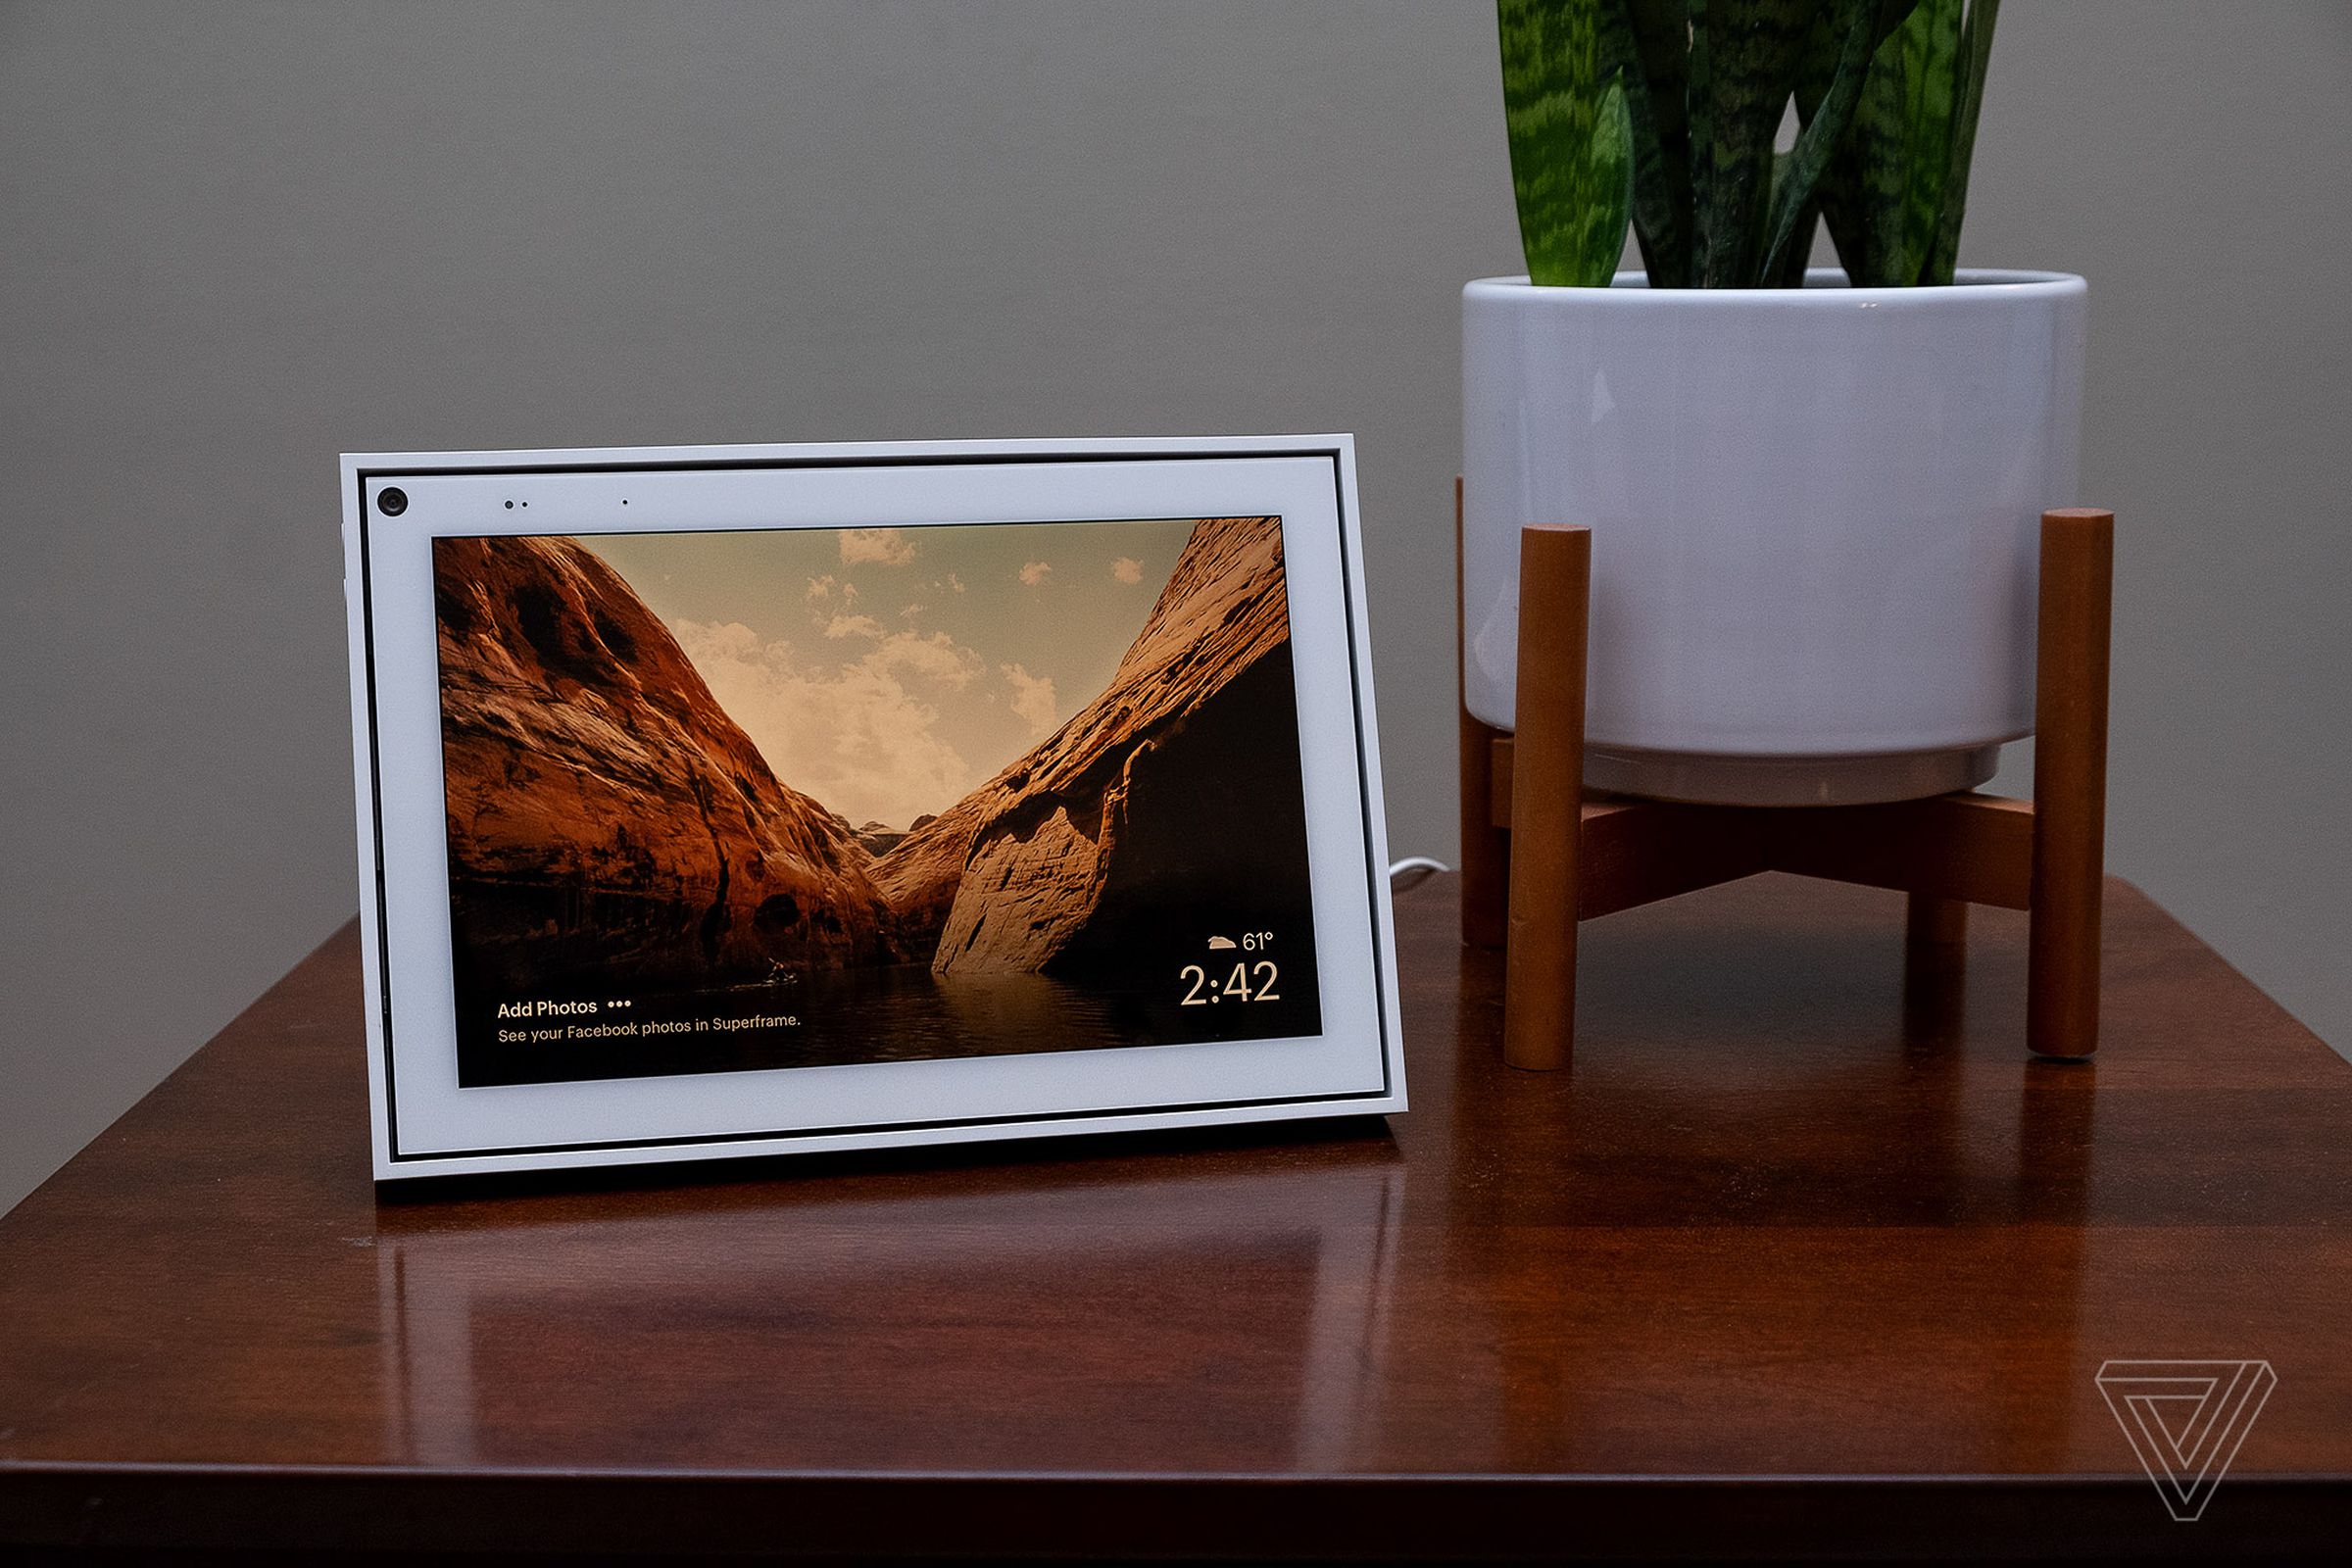 This is the Facebook Portal 10-inch